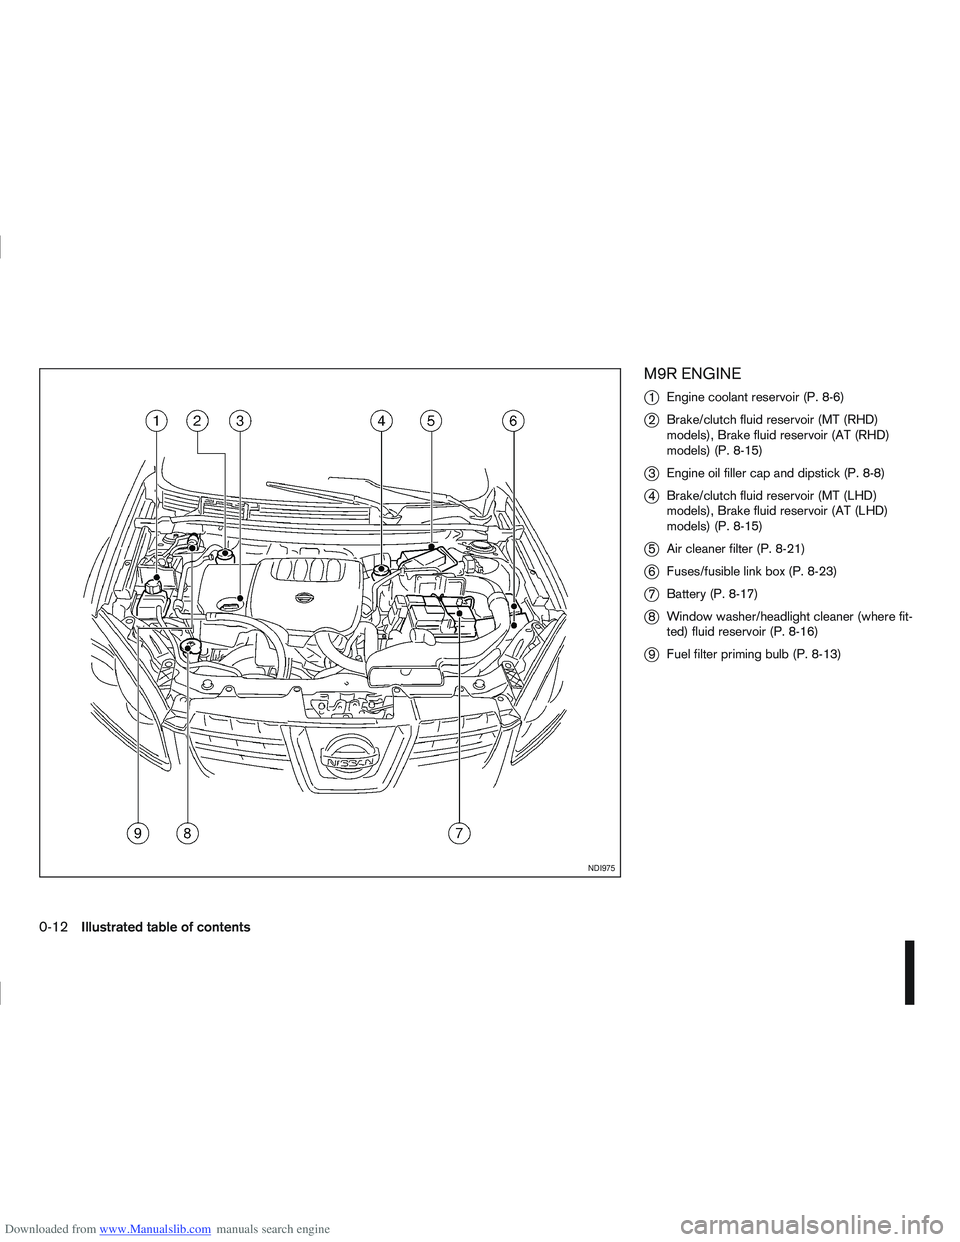 NISSAN QASHQAI 2011  Owners Manual Downloaded from www.Manualslib.com manuals search engine M9R ENGINE
j
1Engine coolant reservoir (P. 8-6)
j2Brake/clutch fluid reservoir (MT (RHD)
models), Brake fluid reservoir (AT (RHD)
models) (P. 8